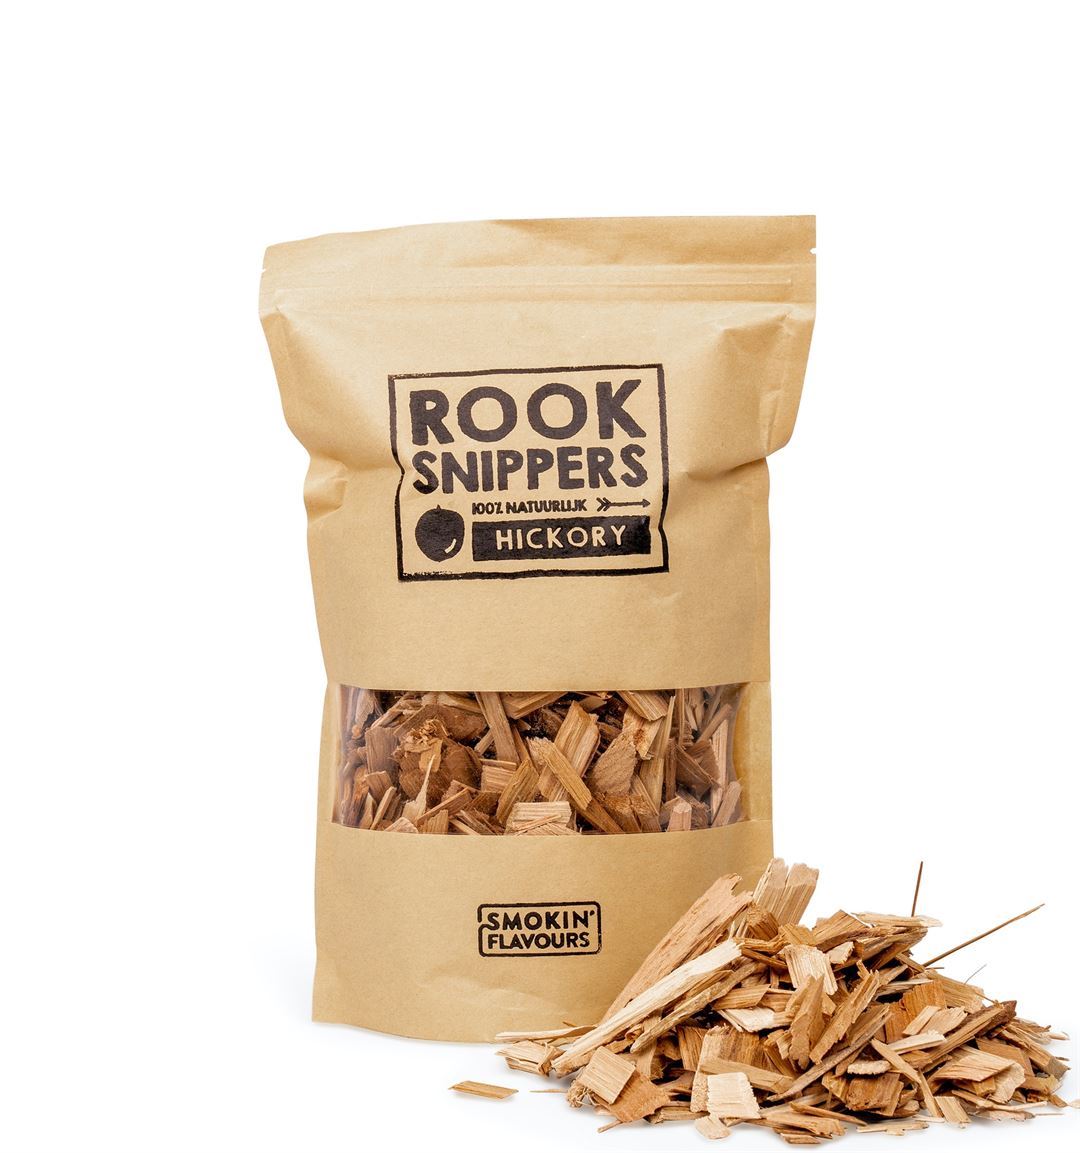 Rooksnippers Hickory